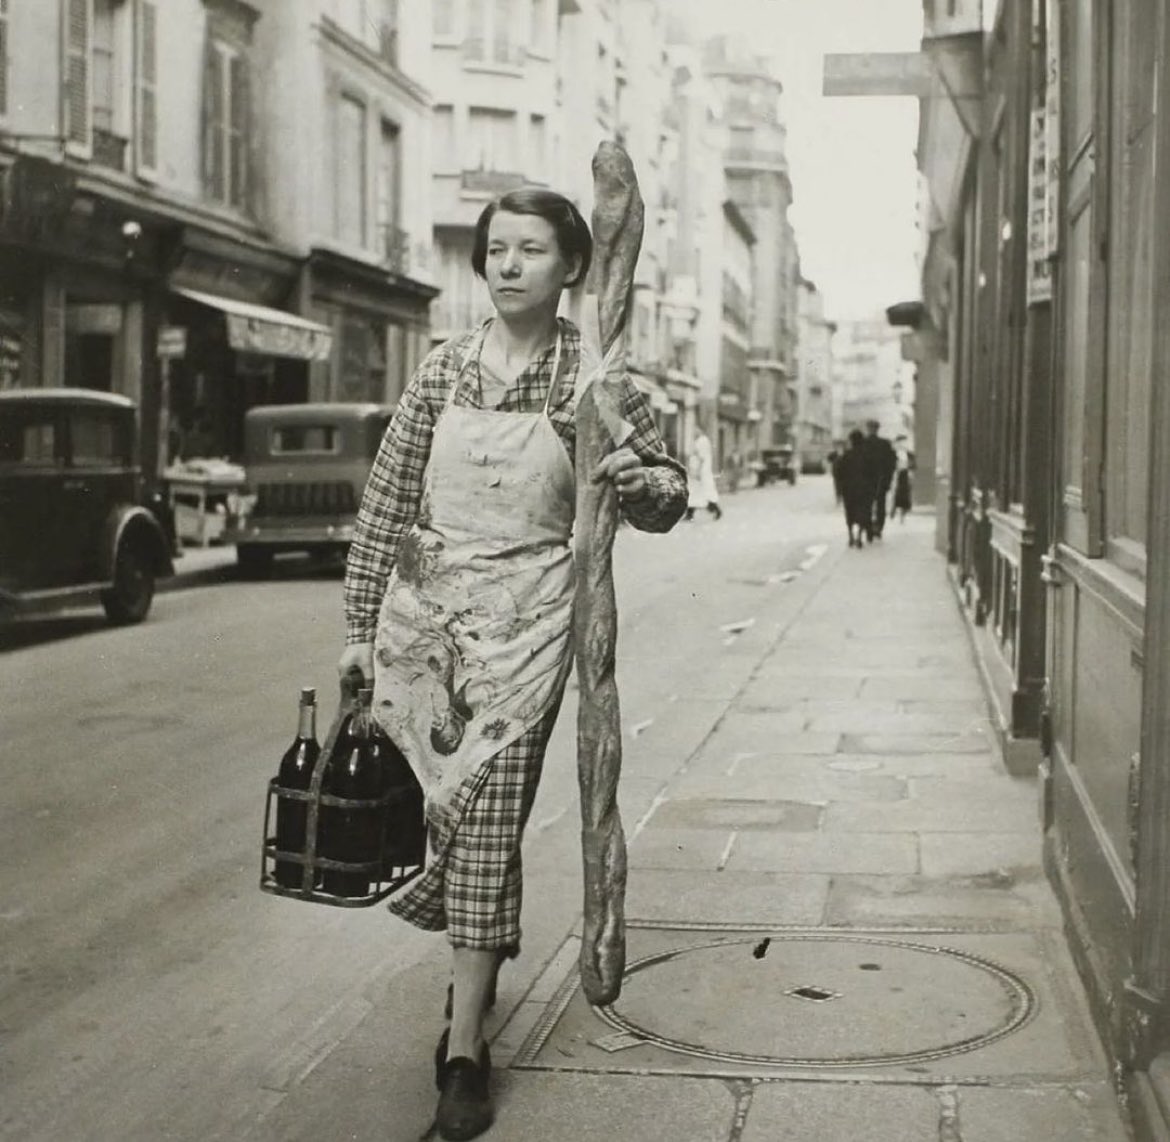 A French woman walks the streets of Paris France with her baguette and six bottles of wine, 1945.